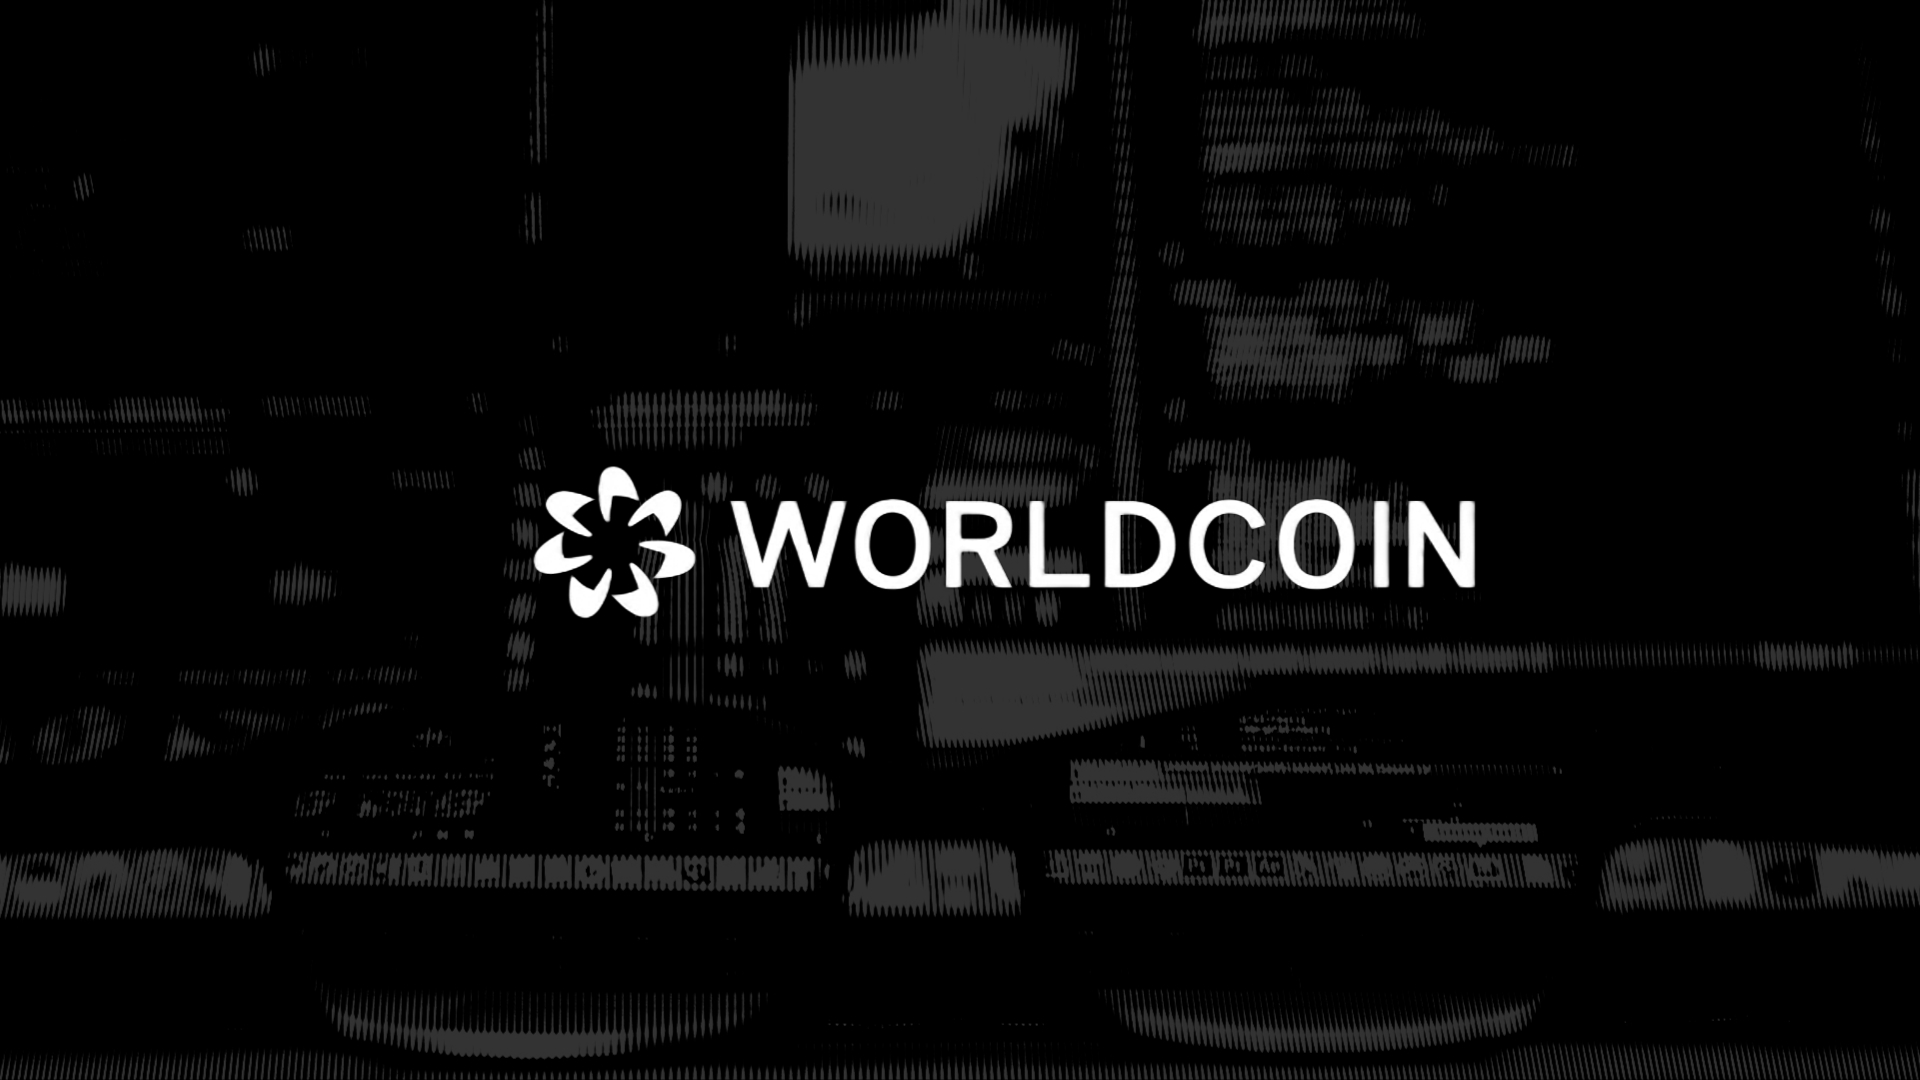 Worldcoin Launches Gas-free, Human-only Crypto Wallet